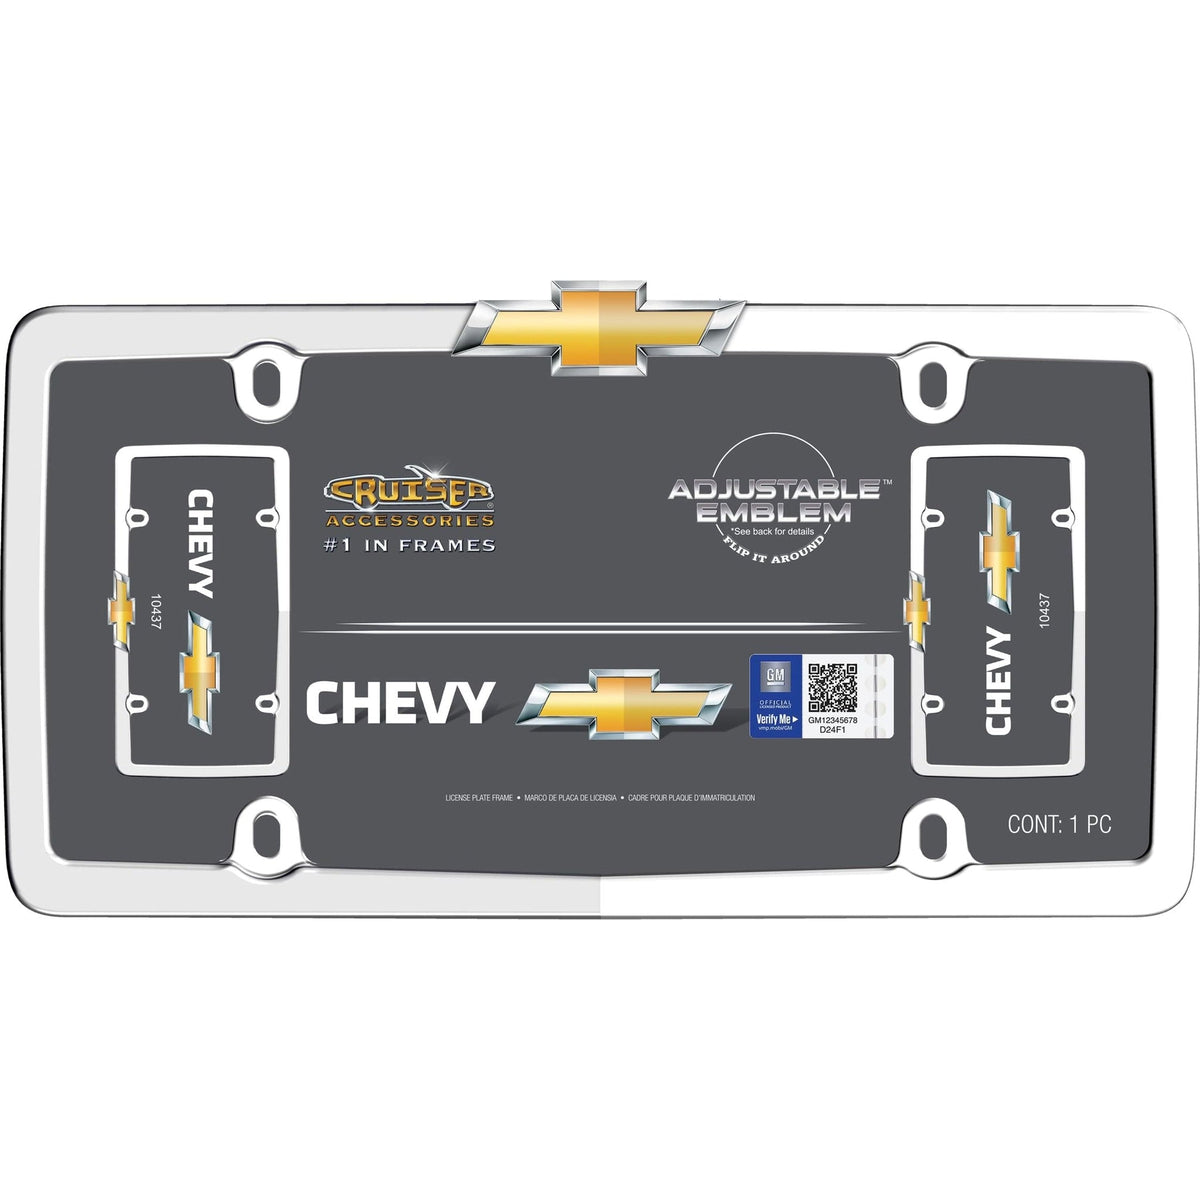 Cruiser Accessories Qualifies for Free Shipping Cruiser License Plate Frame Chevy Chrome-Plated Metal #10437